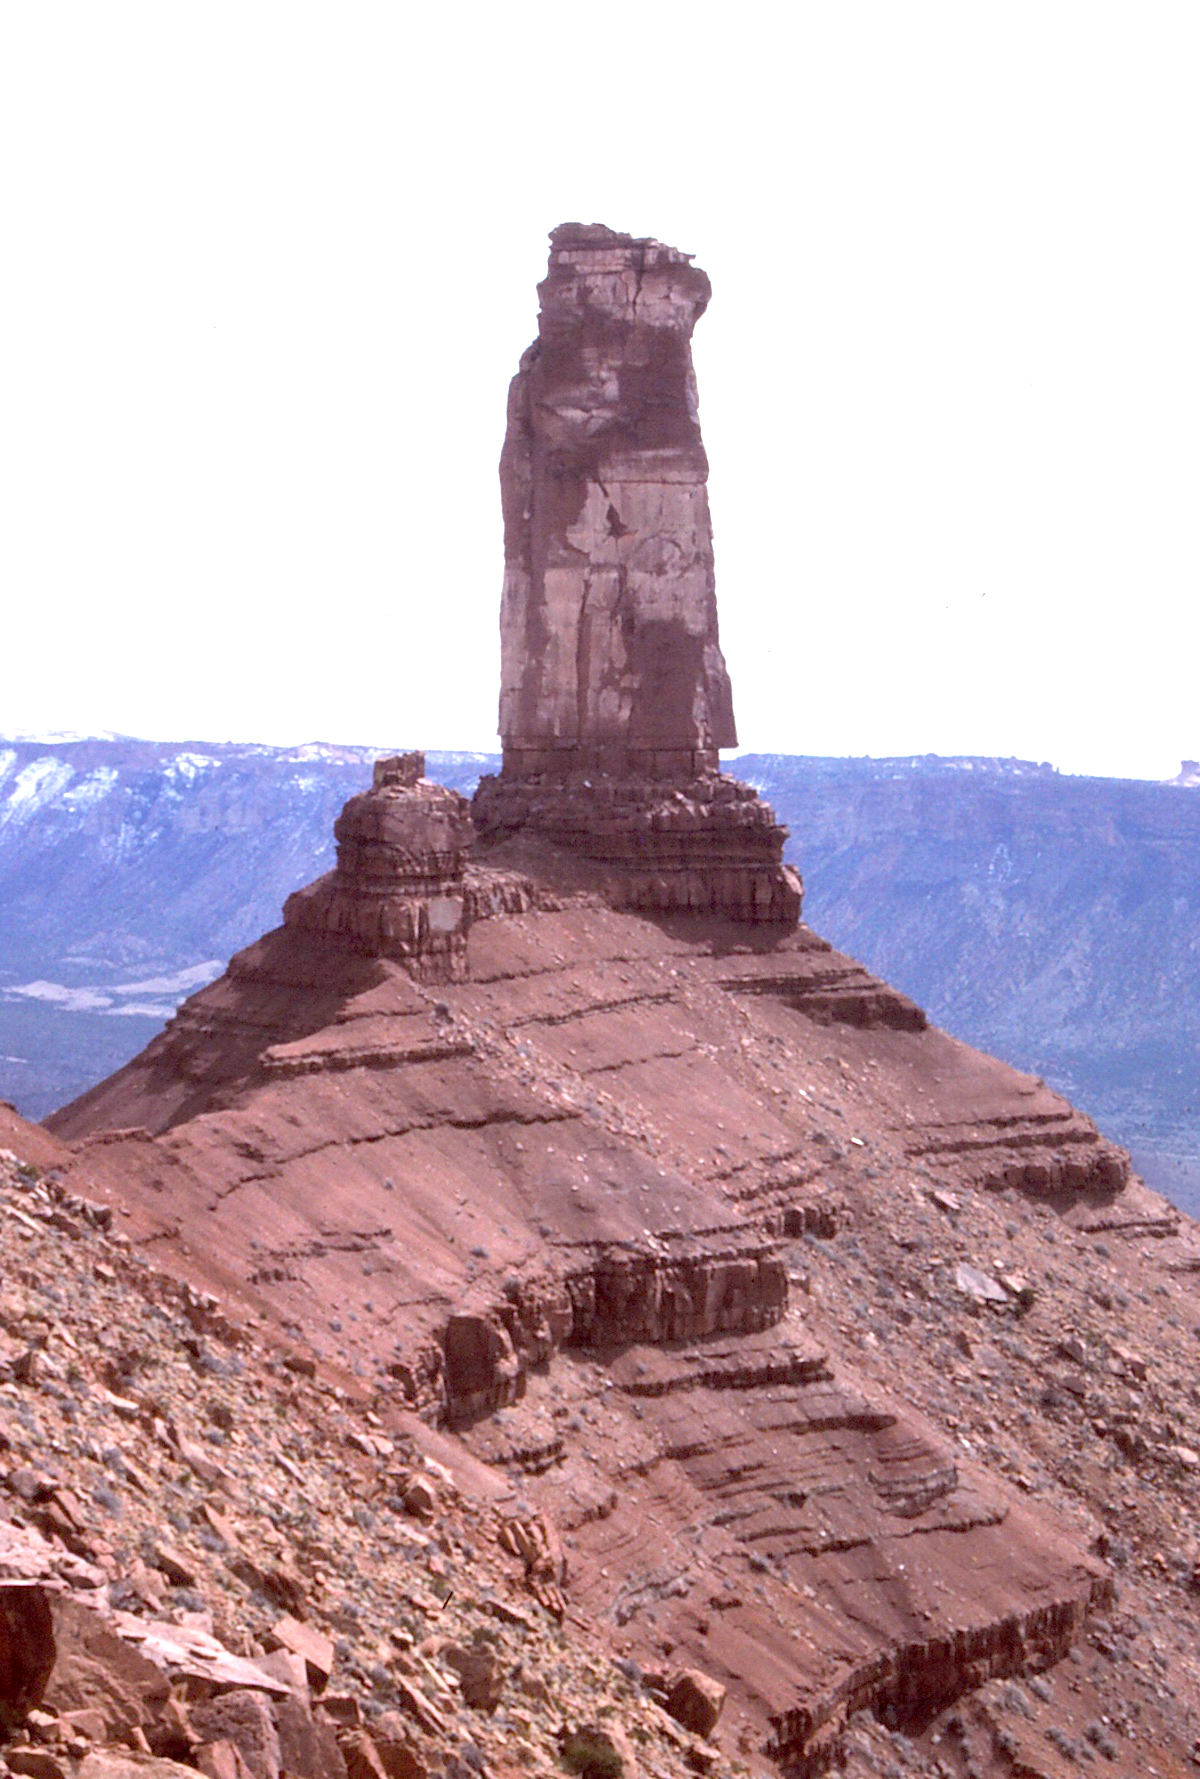 The north face of Castleton Tower, Utah. The Kor-Ingalls Route described in the story ascends the opposite side of the tower. [Photo] Cameron M. Burns